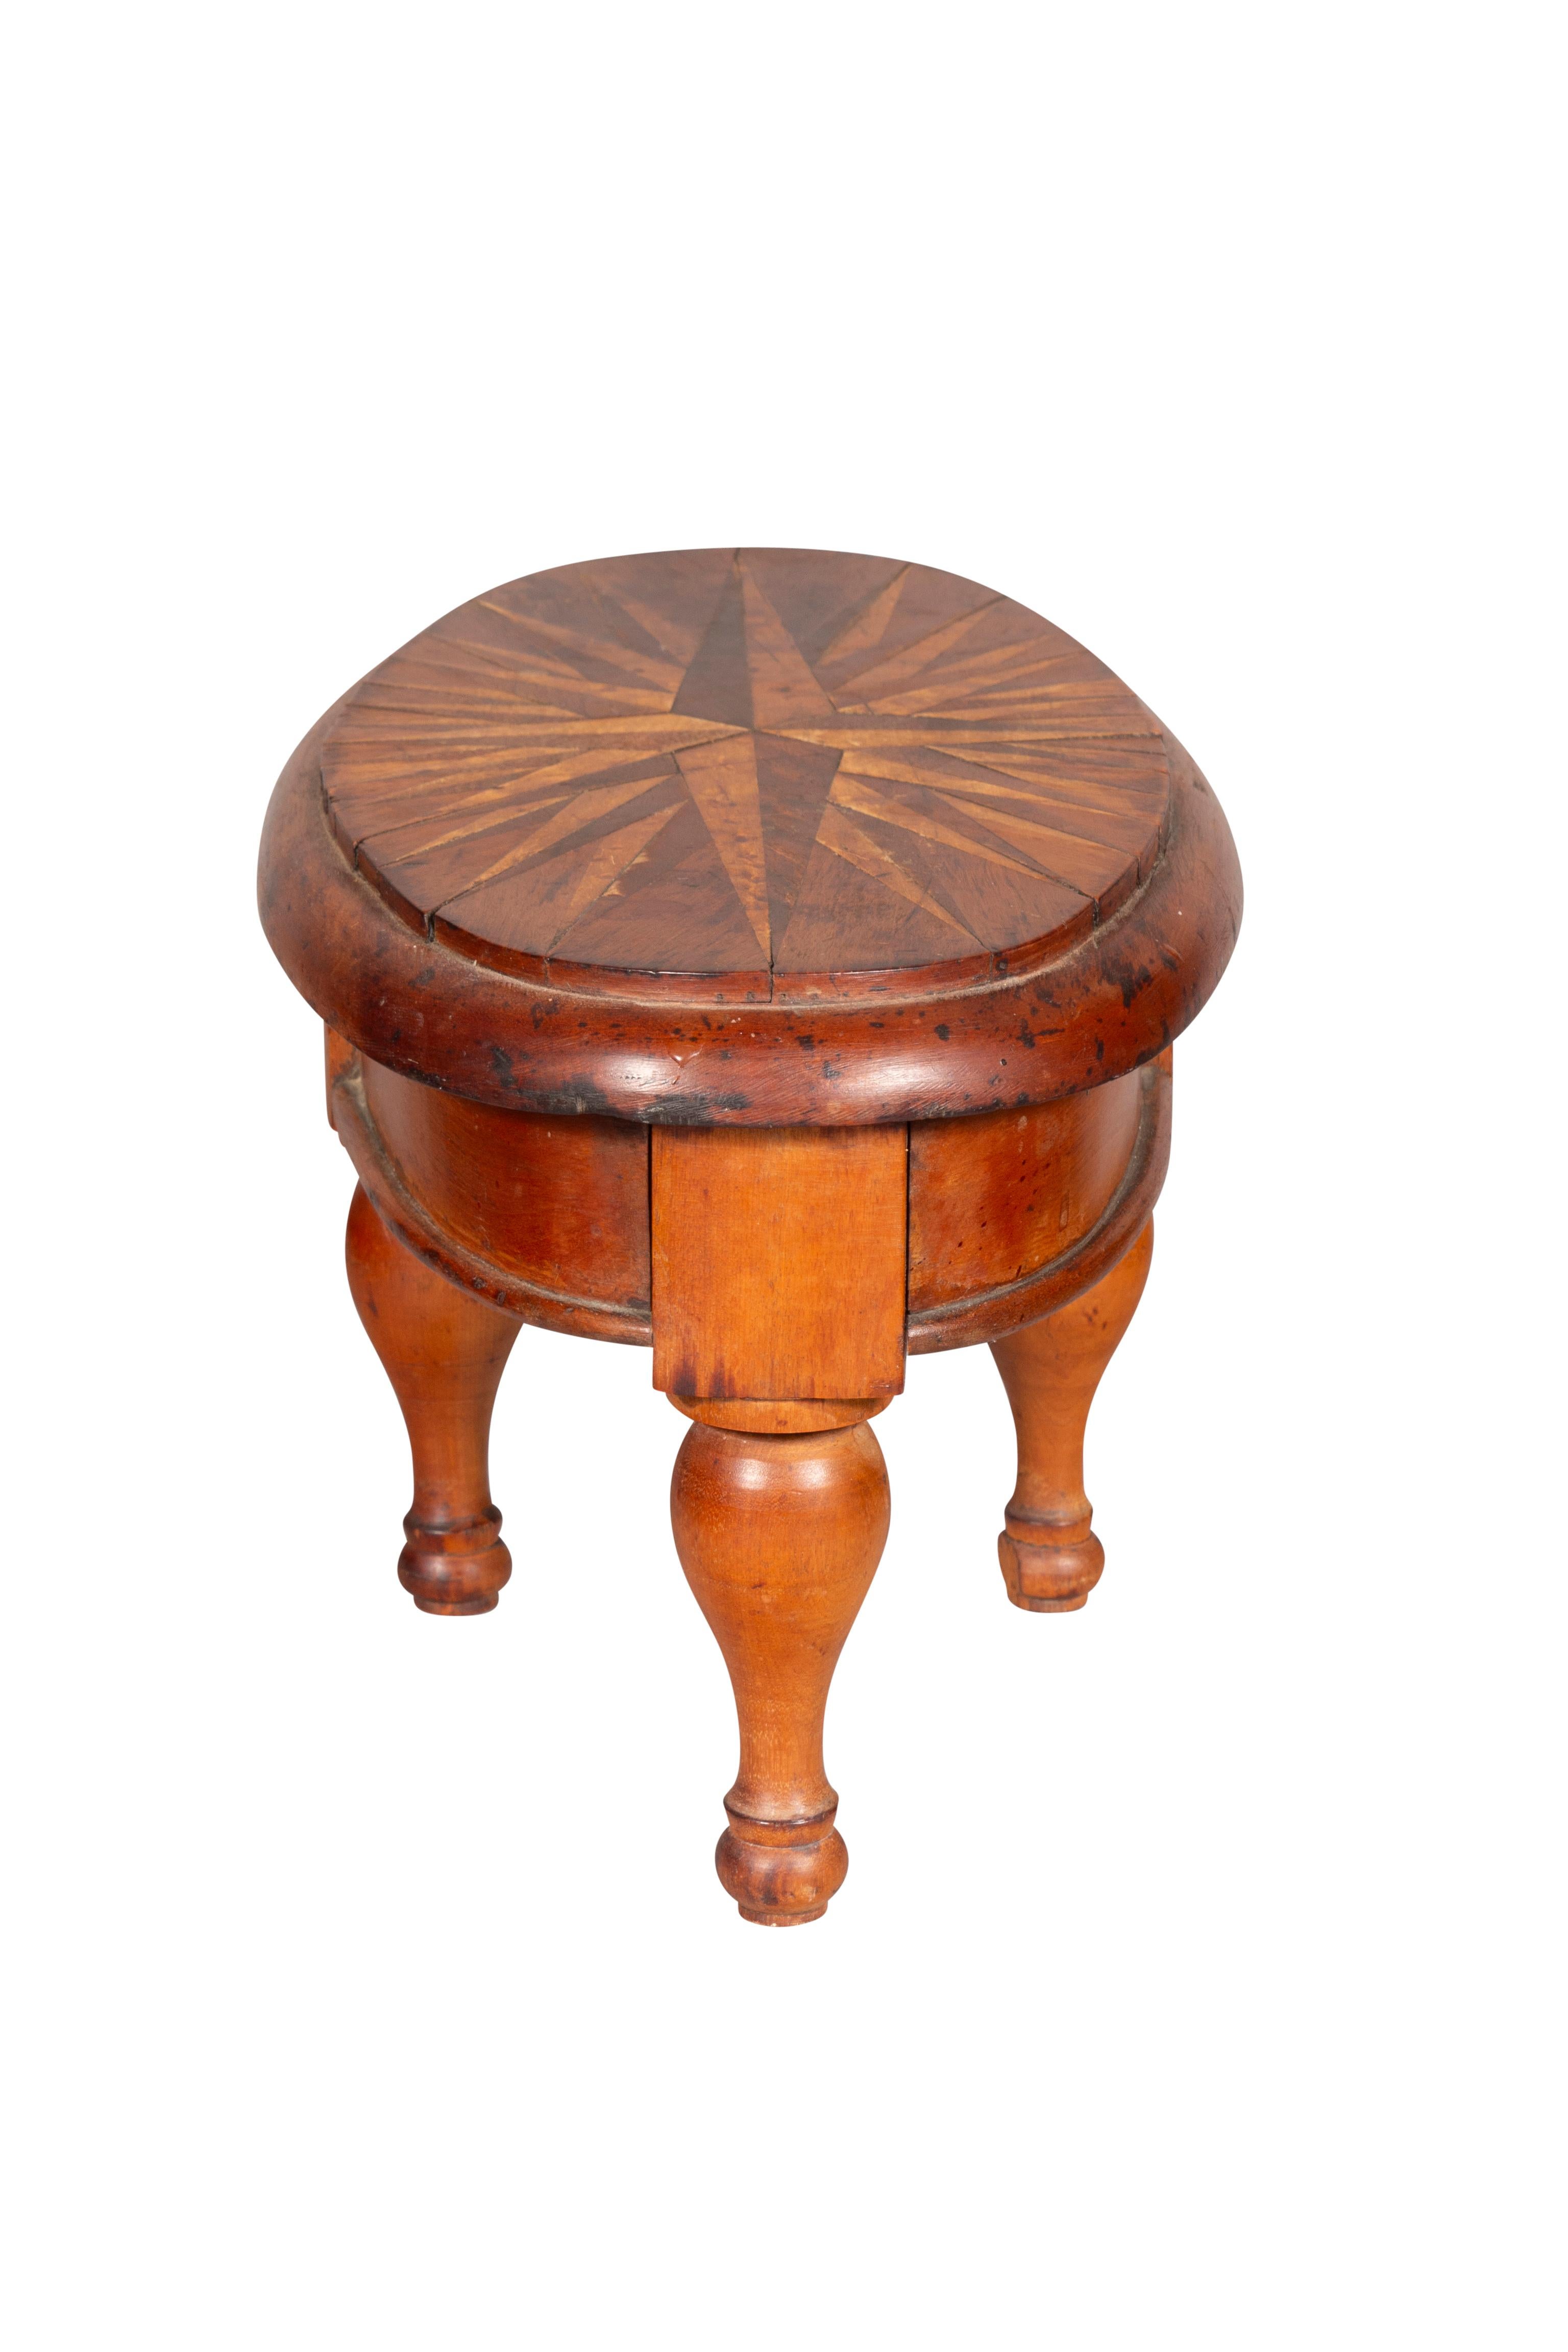 Mid-19th Century American Late Federal Walnut Table Form Centerpiece For Sale